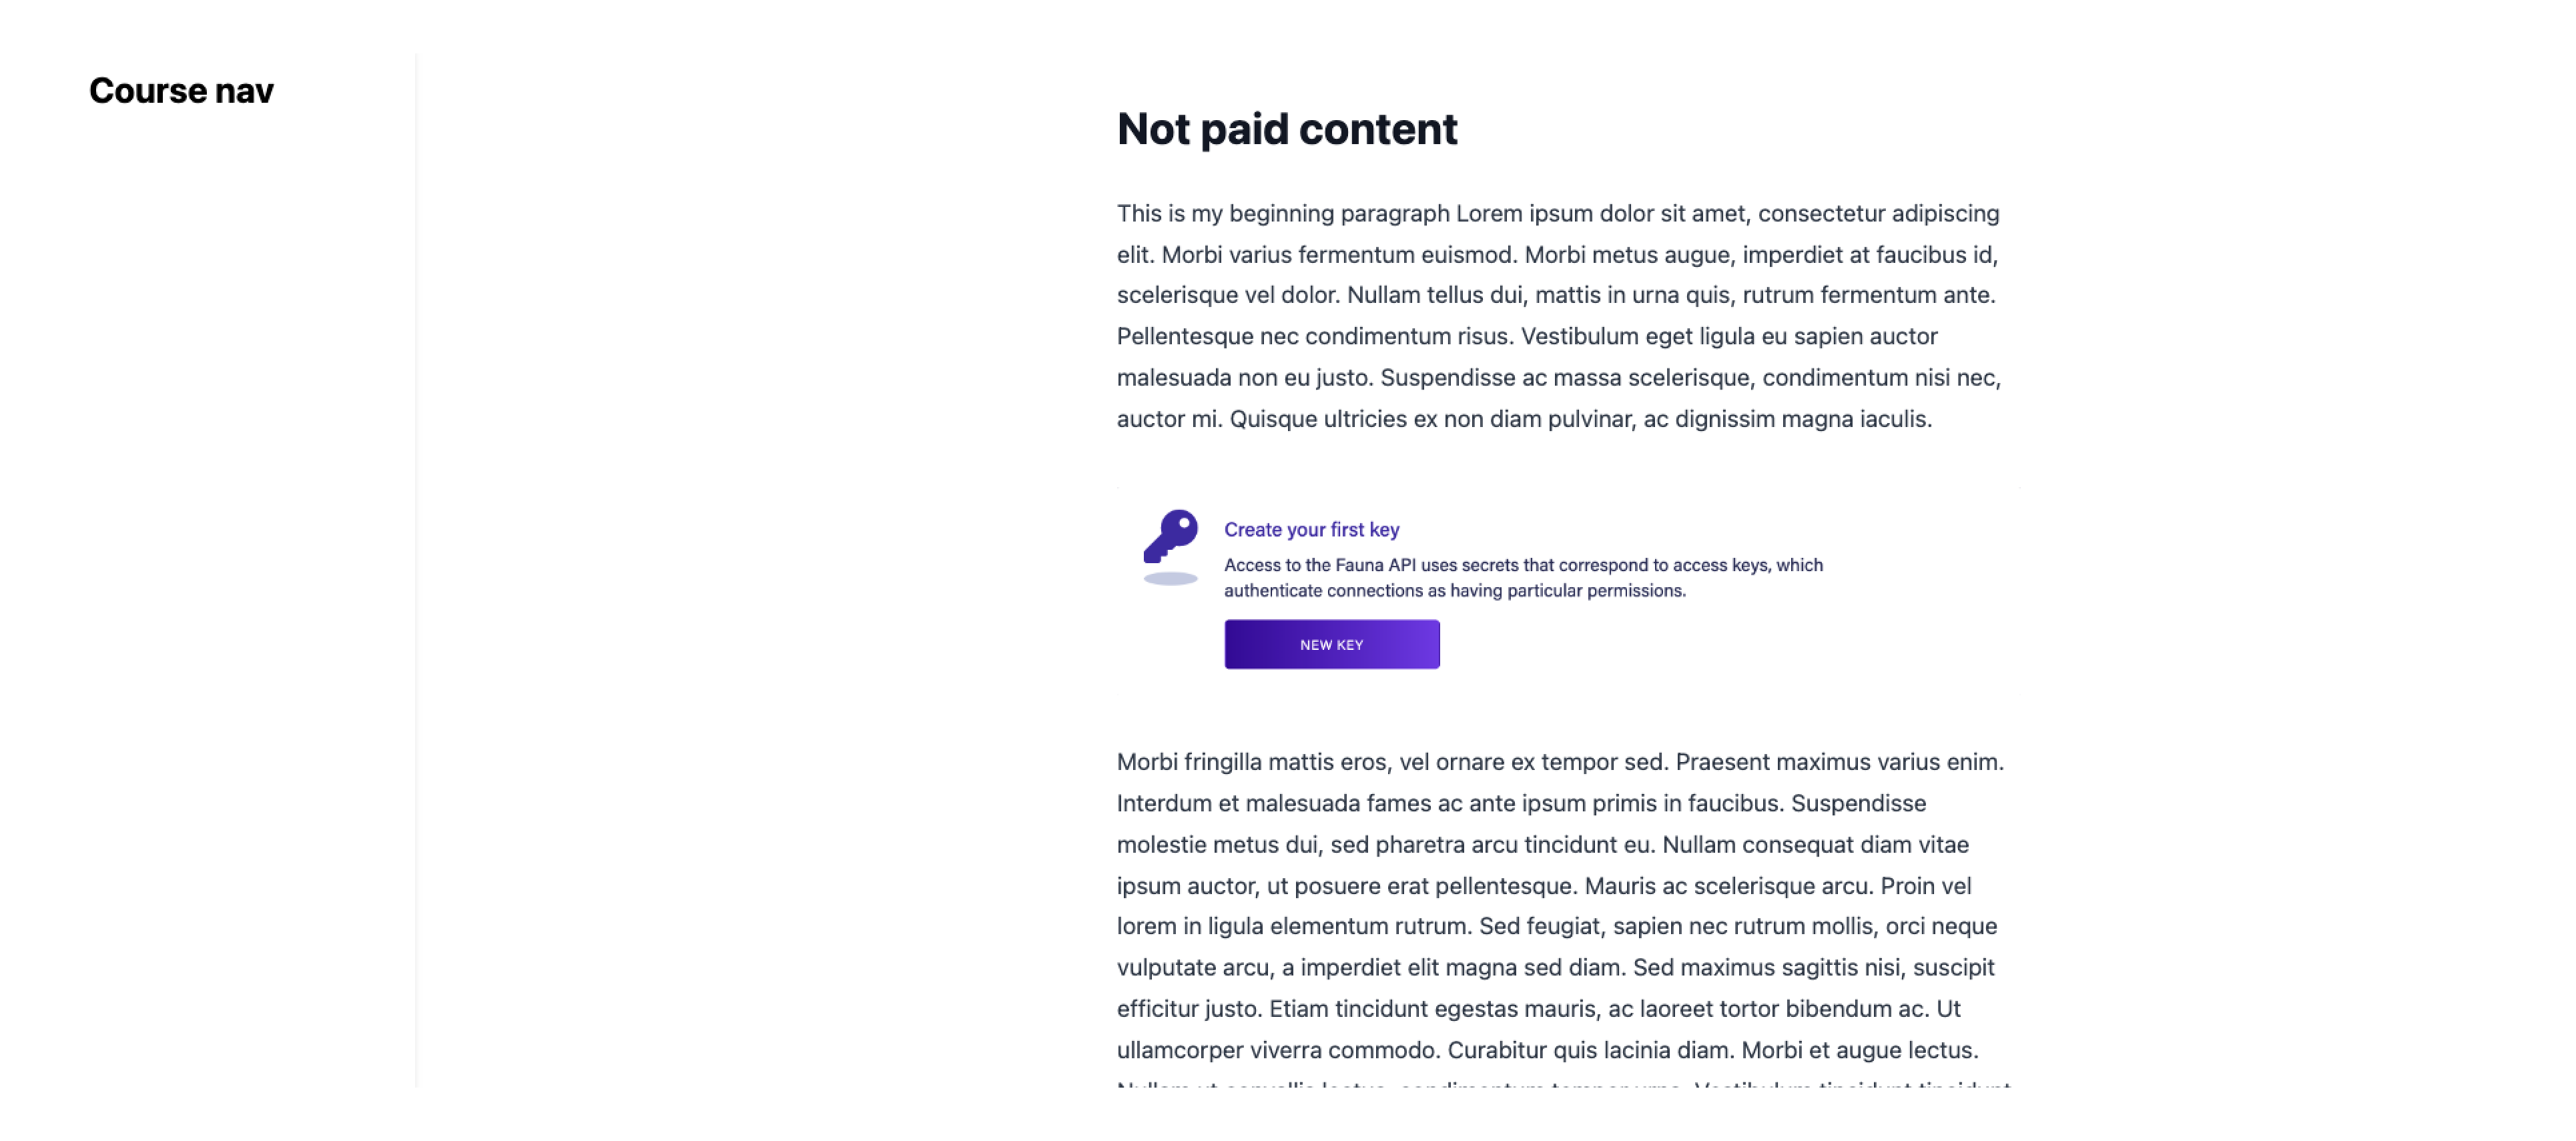 "Not paid content" Course page with rich text displaying